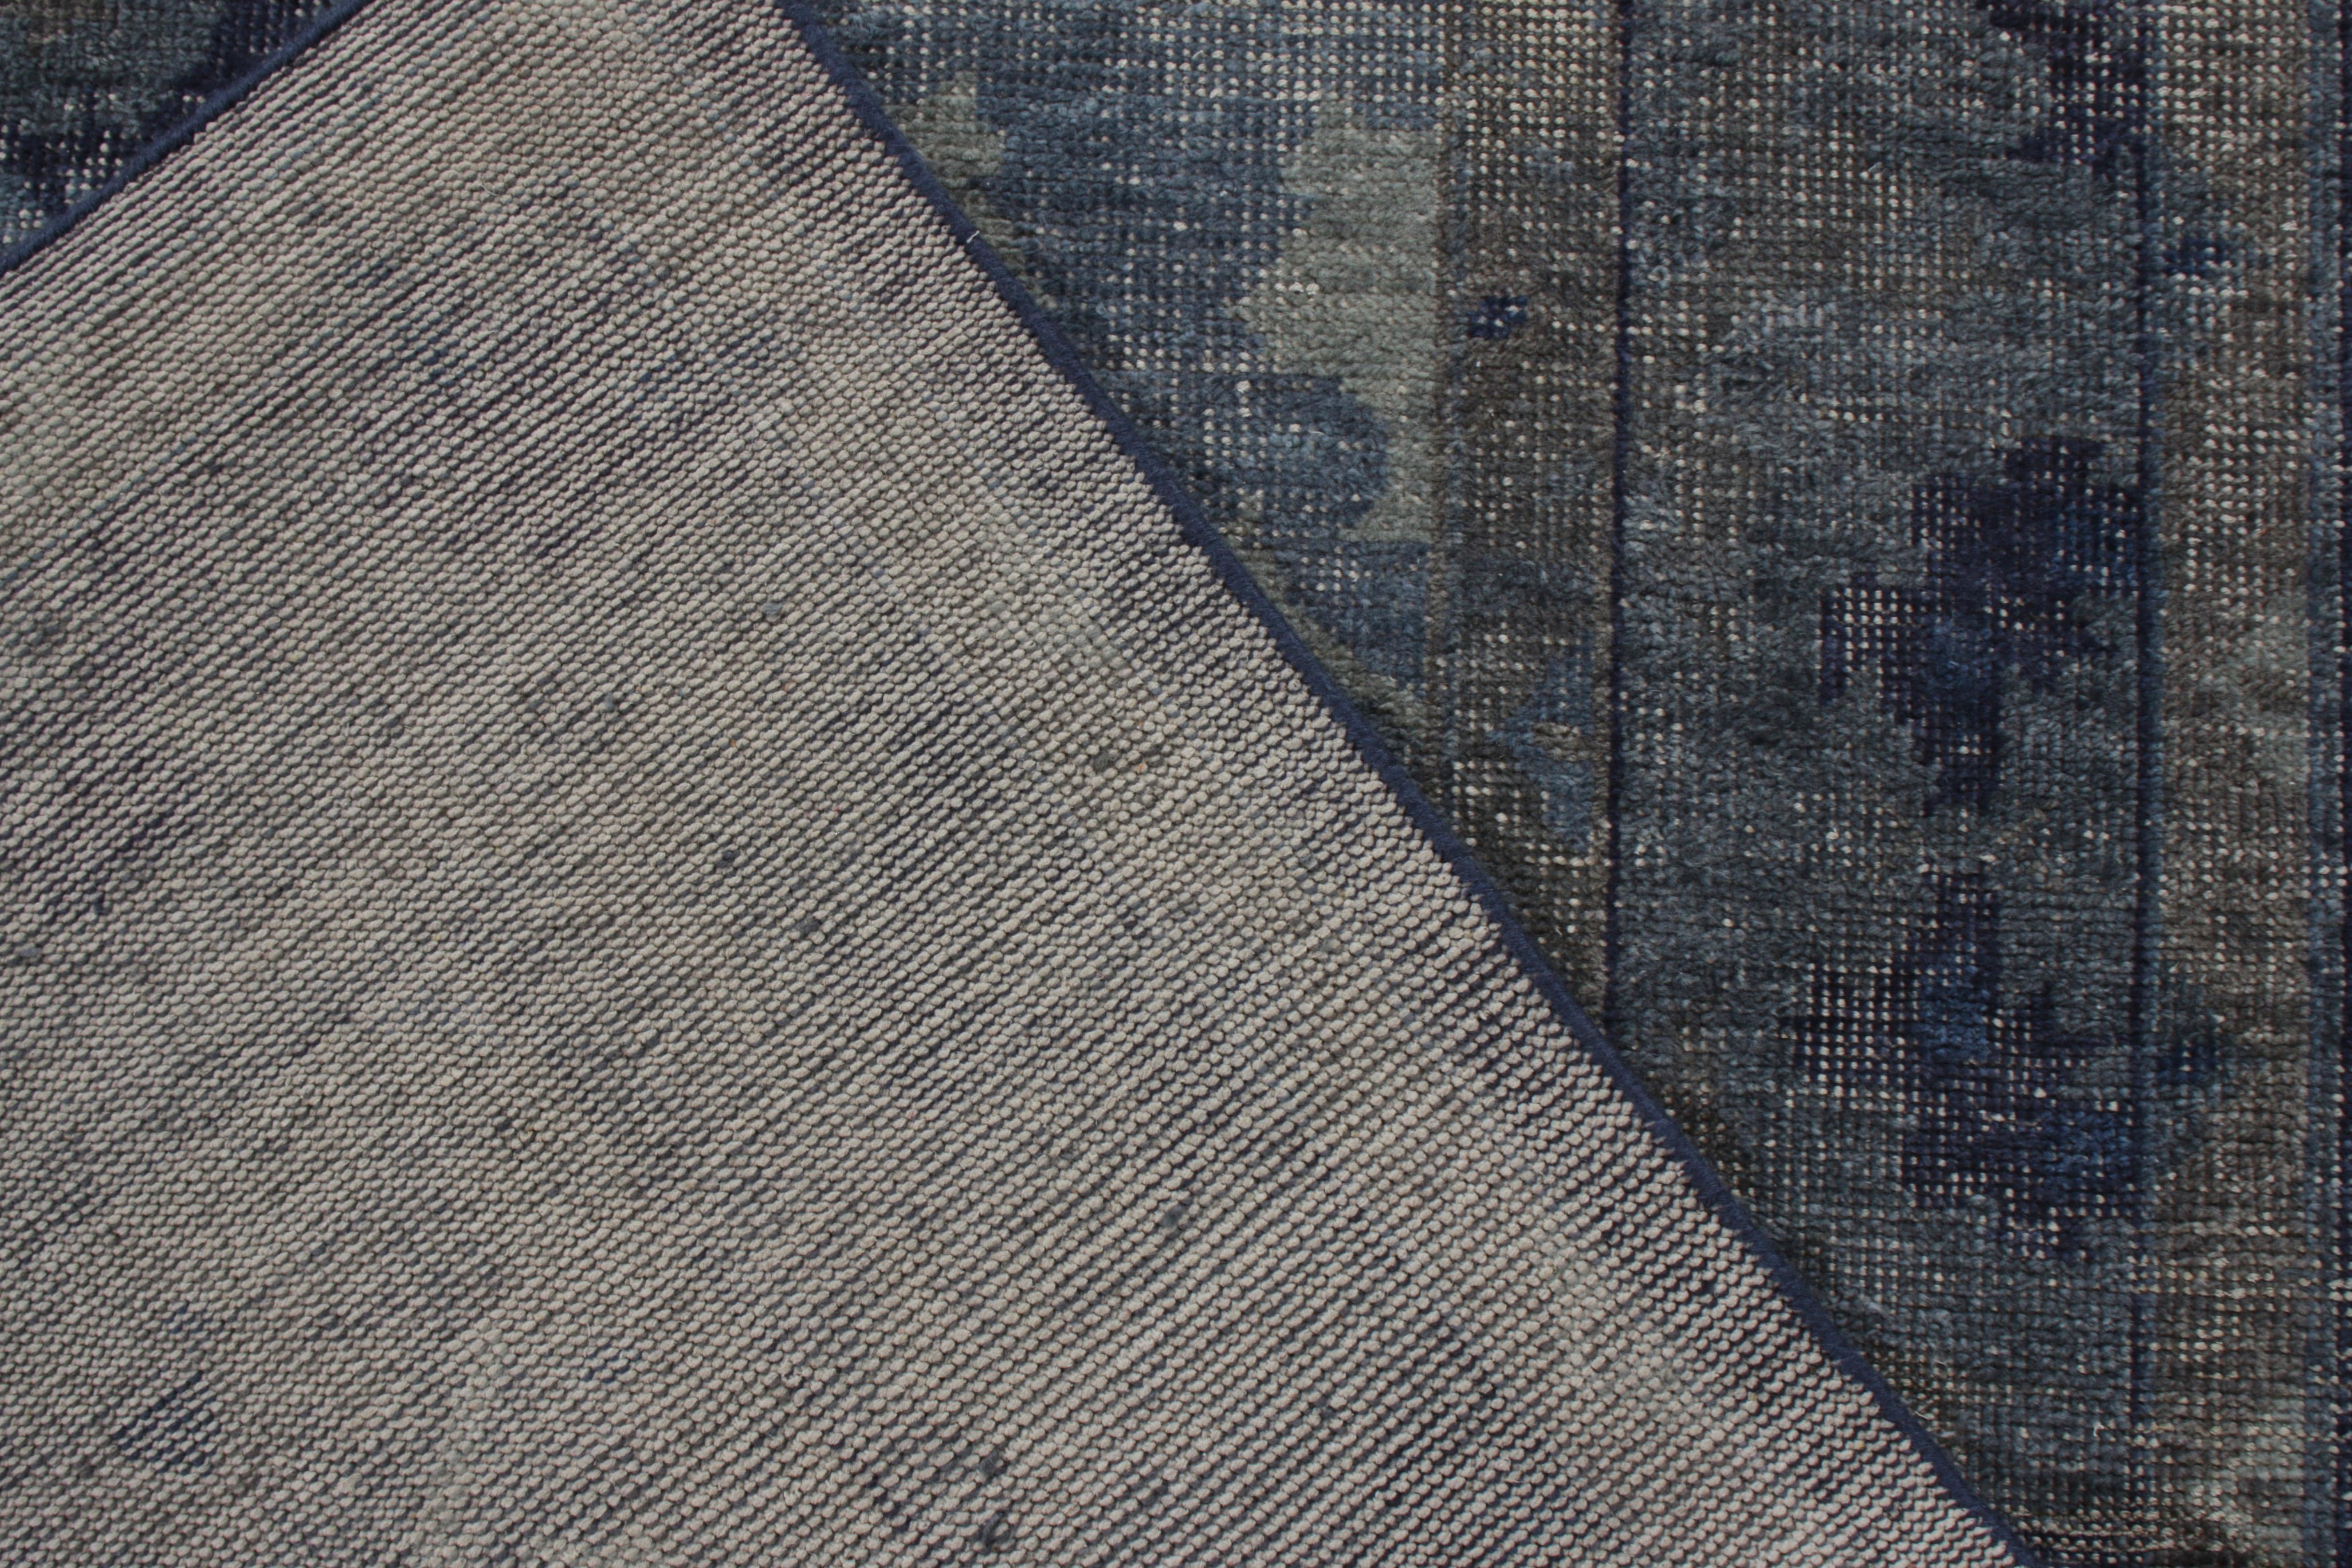 Rug & Kilim's Distressed Transitional Style Teppich in Blau, Graues Medaillon-Muster (Handgeknüpft) im Angebot